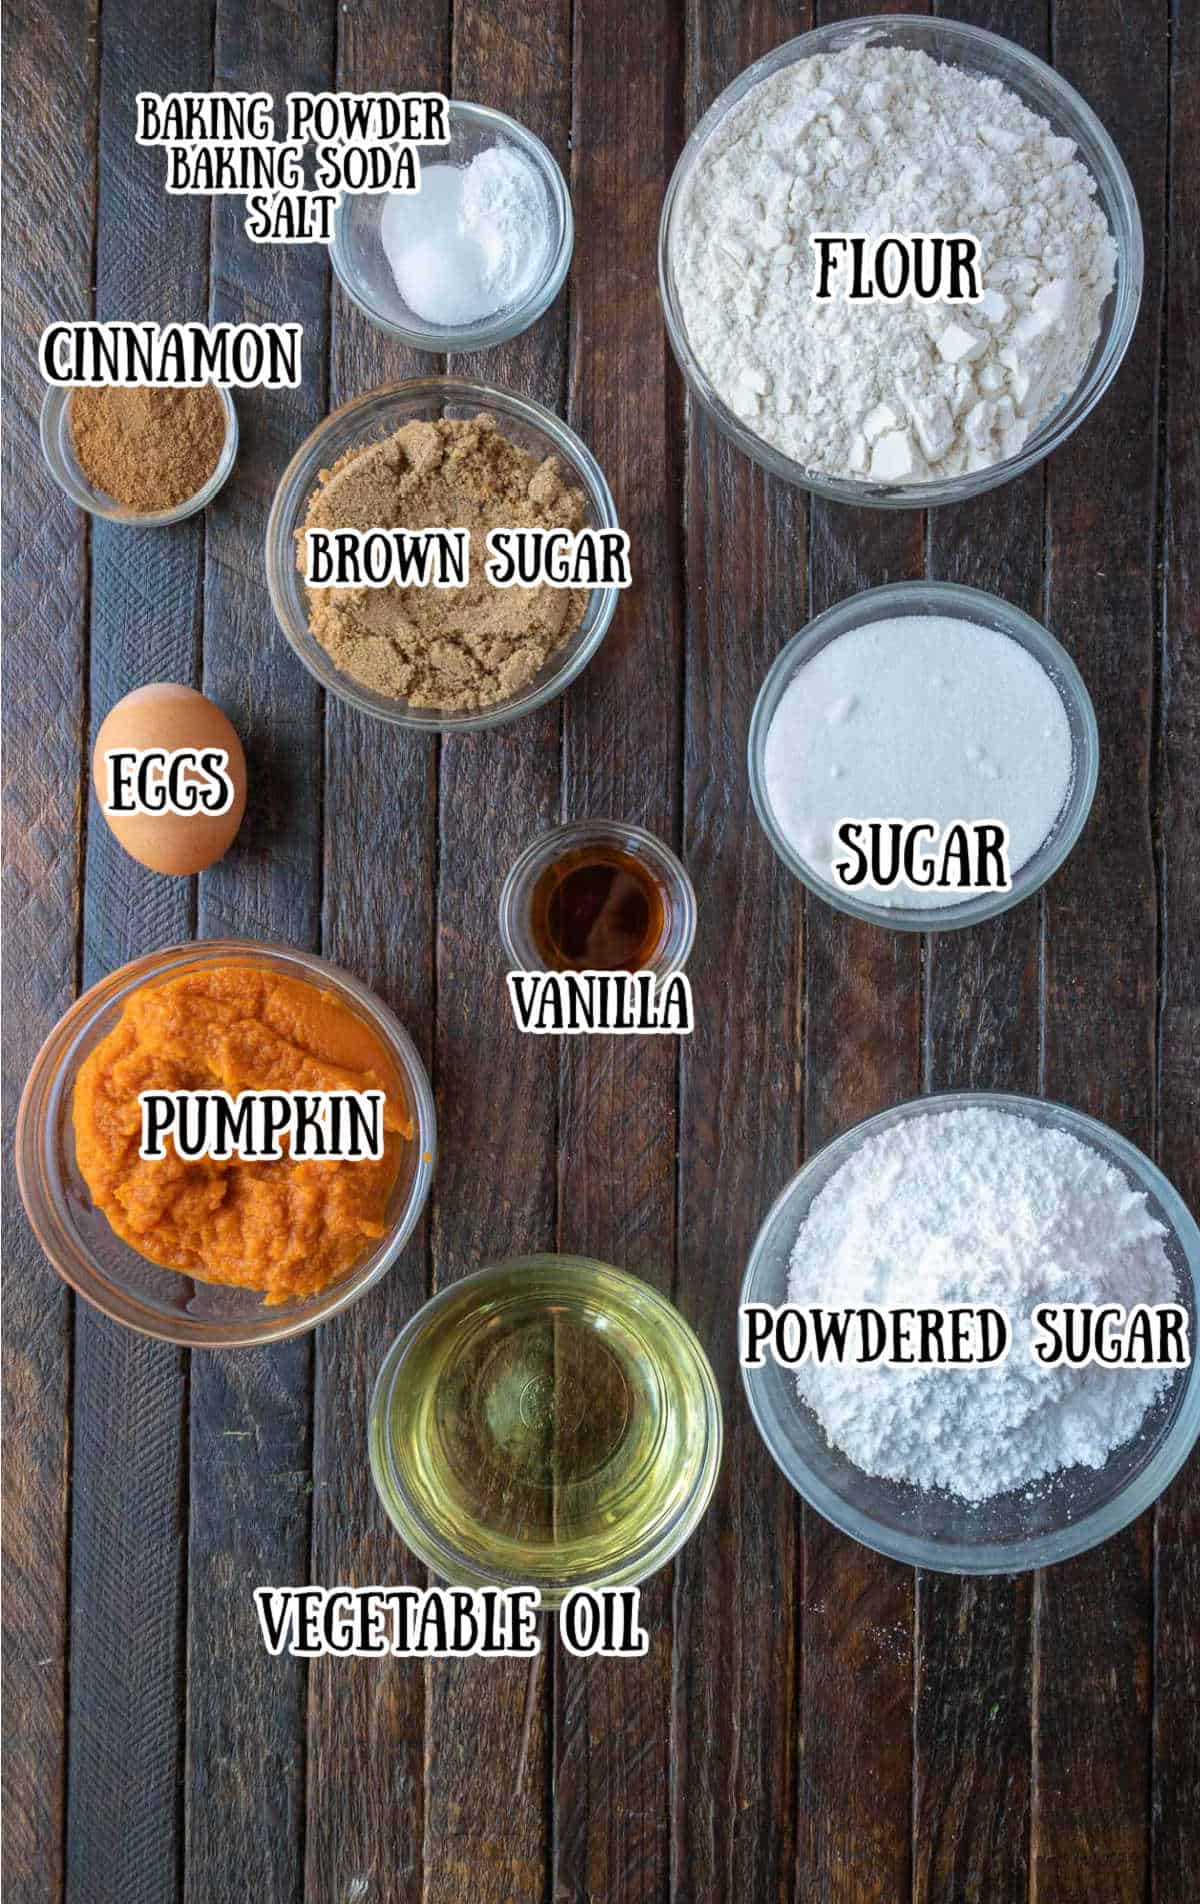 All the ingredients needed for these pumpkin crinkle cookies.